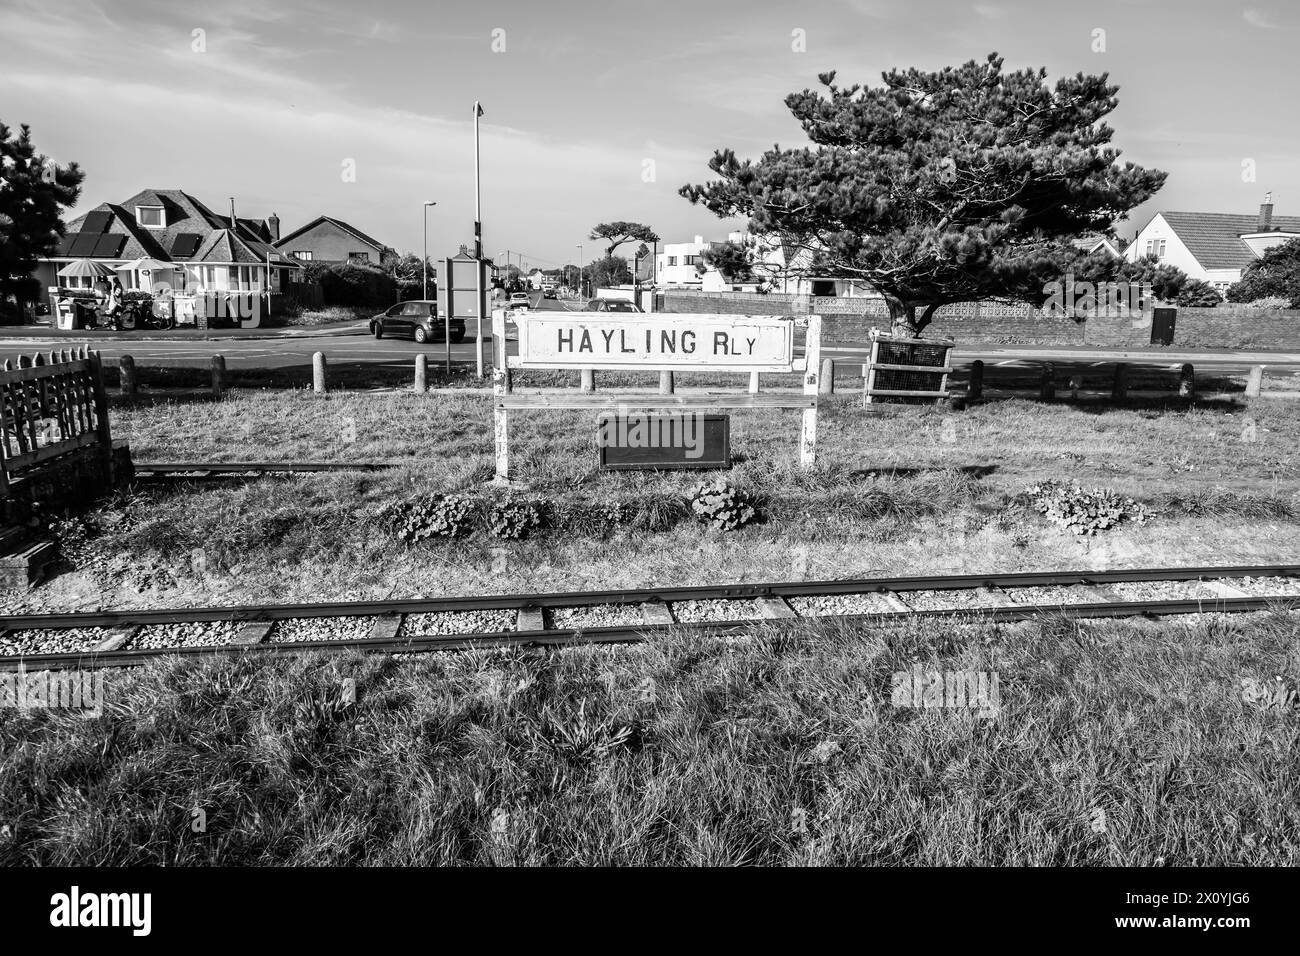 Hayling Railway sign on the heritage railway route on Hayling Island in ...